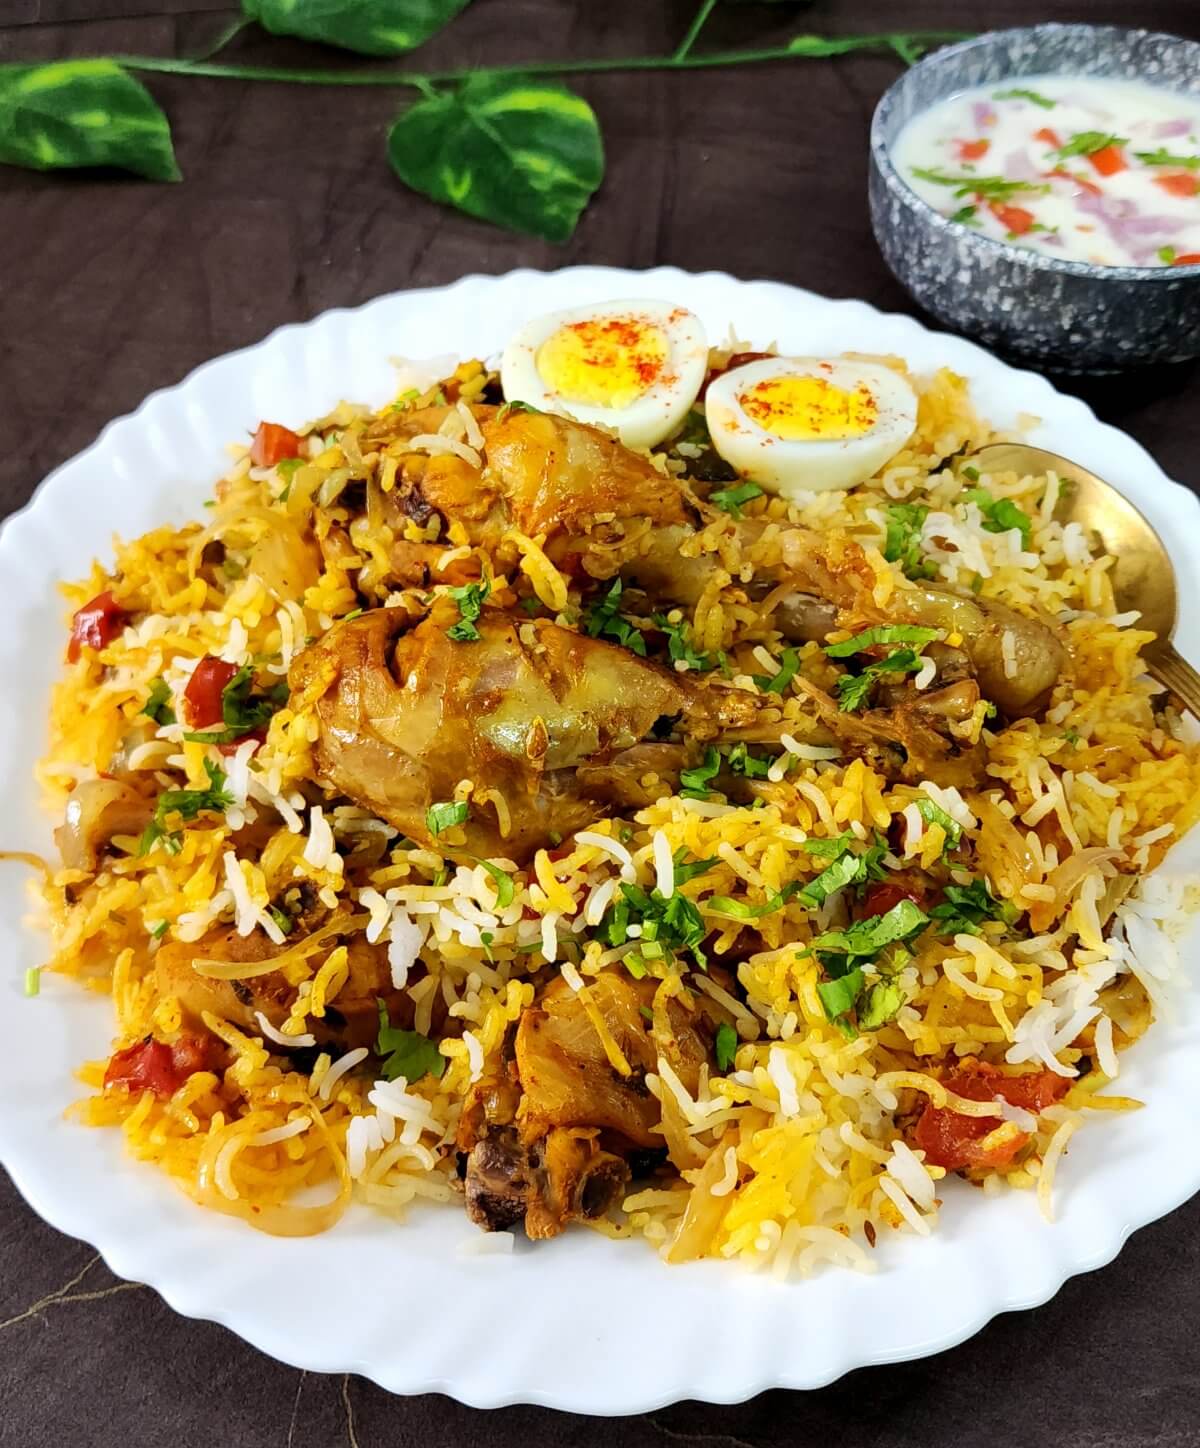 Delicious chicken biryani served on a white ceramic plate with a side of raita.